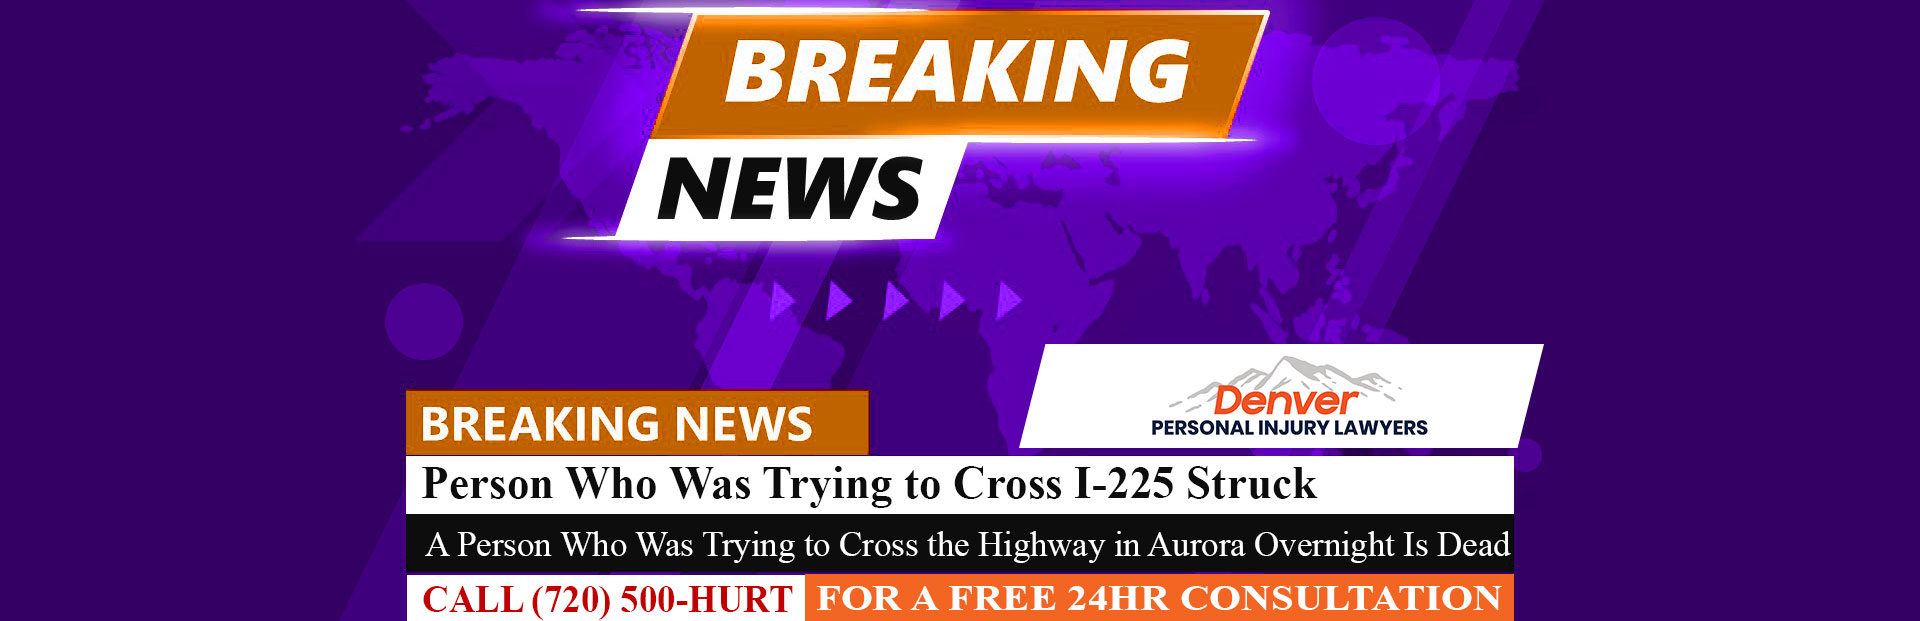 [01-02-23] Person Who Was Trying to Cross I-225 Struck, Killed in Aurora